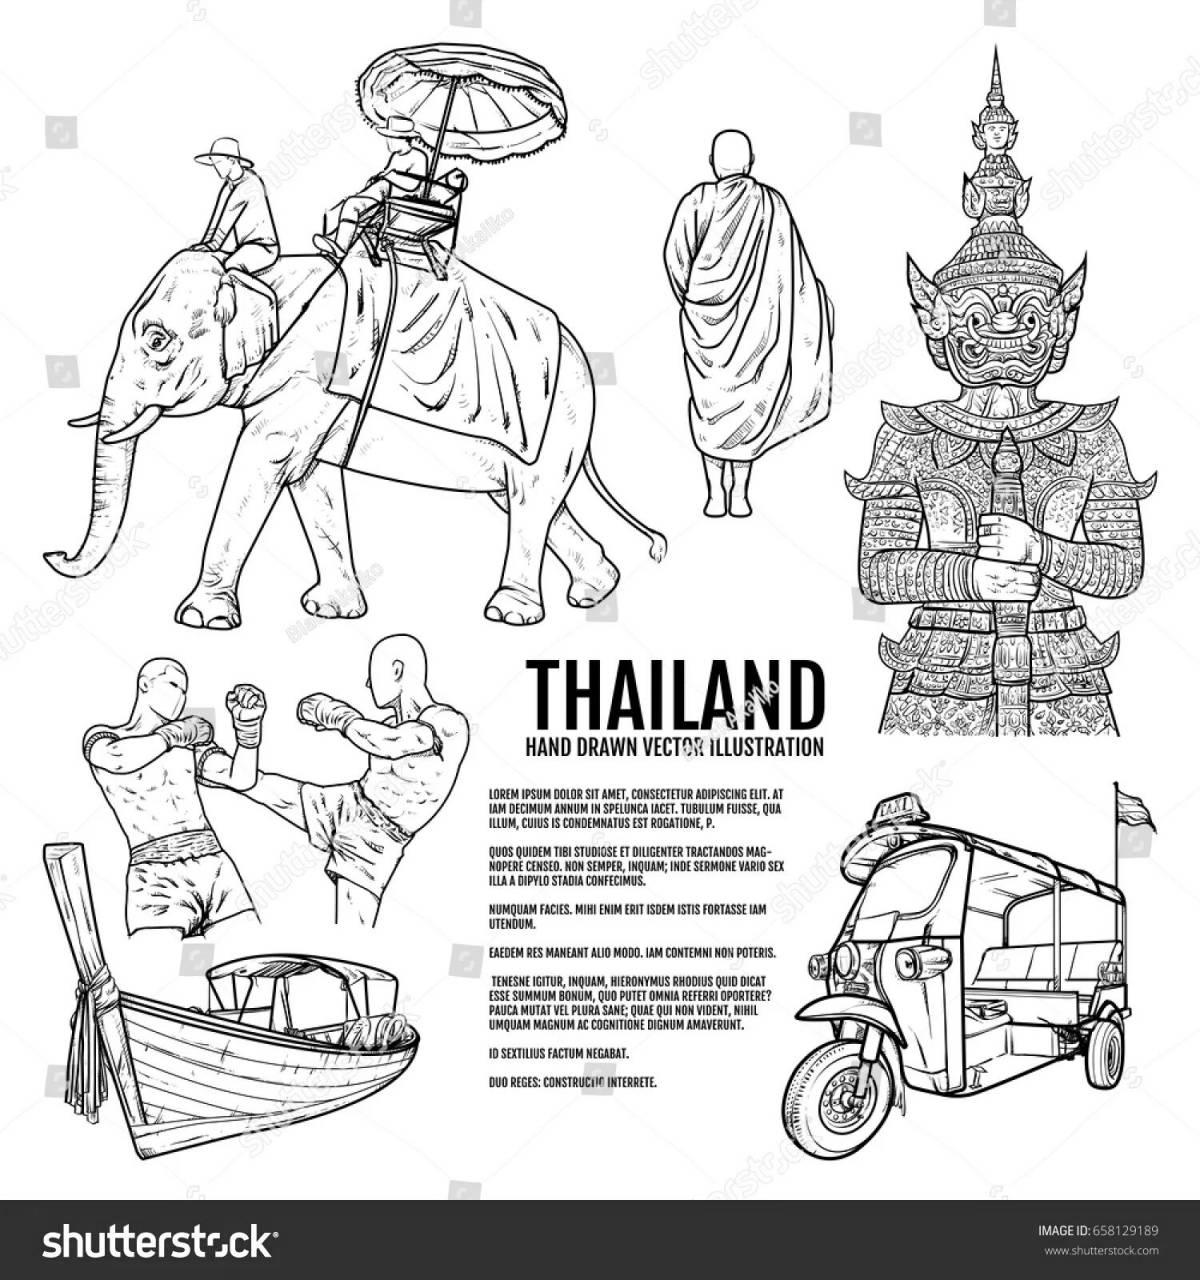 Coloring book glowing thailand